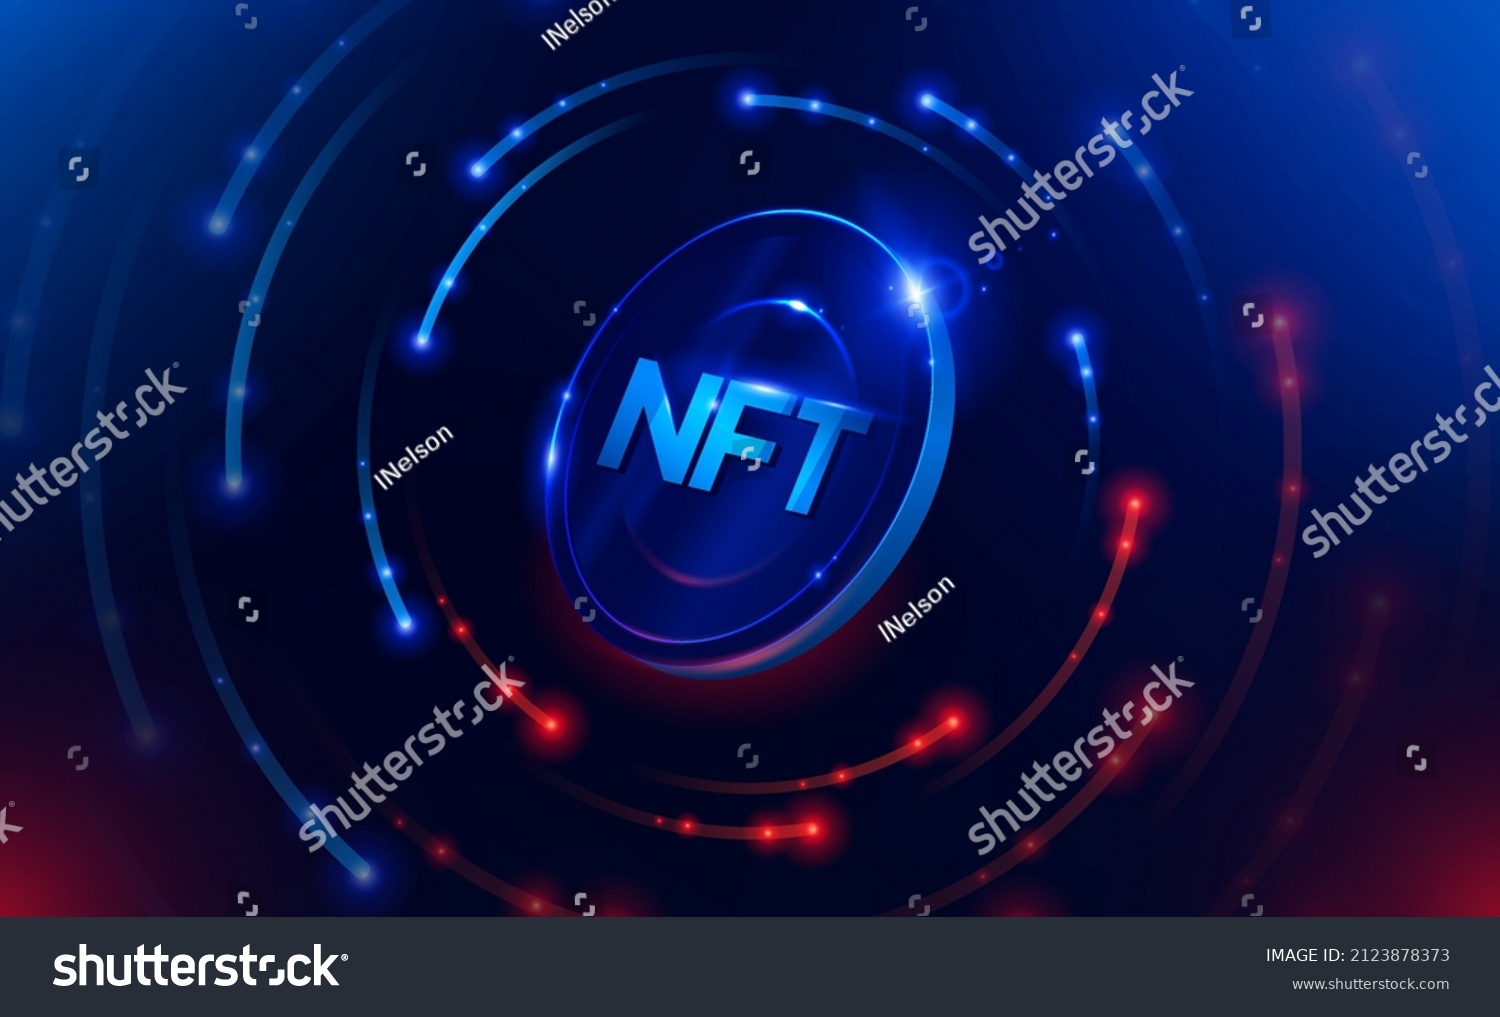 SVG of NFT nonfungible token illustration with red and blue glowing lights dark blue background. Vector cryptocurrency svg